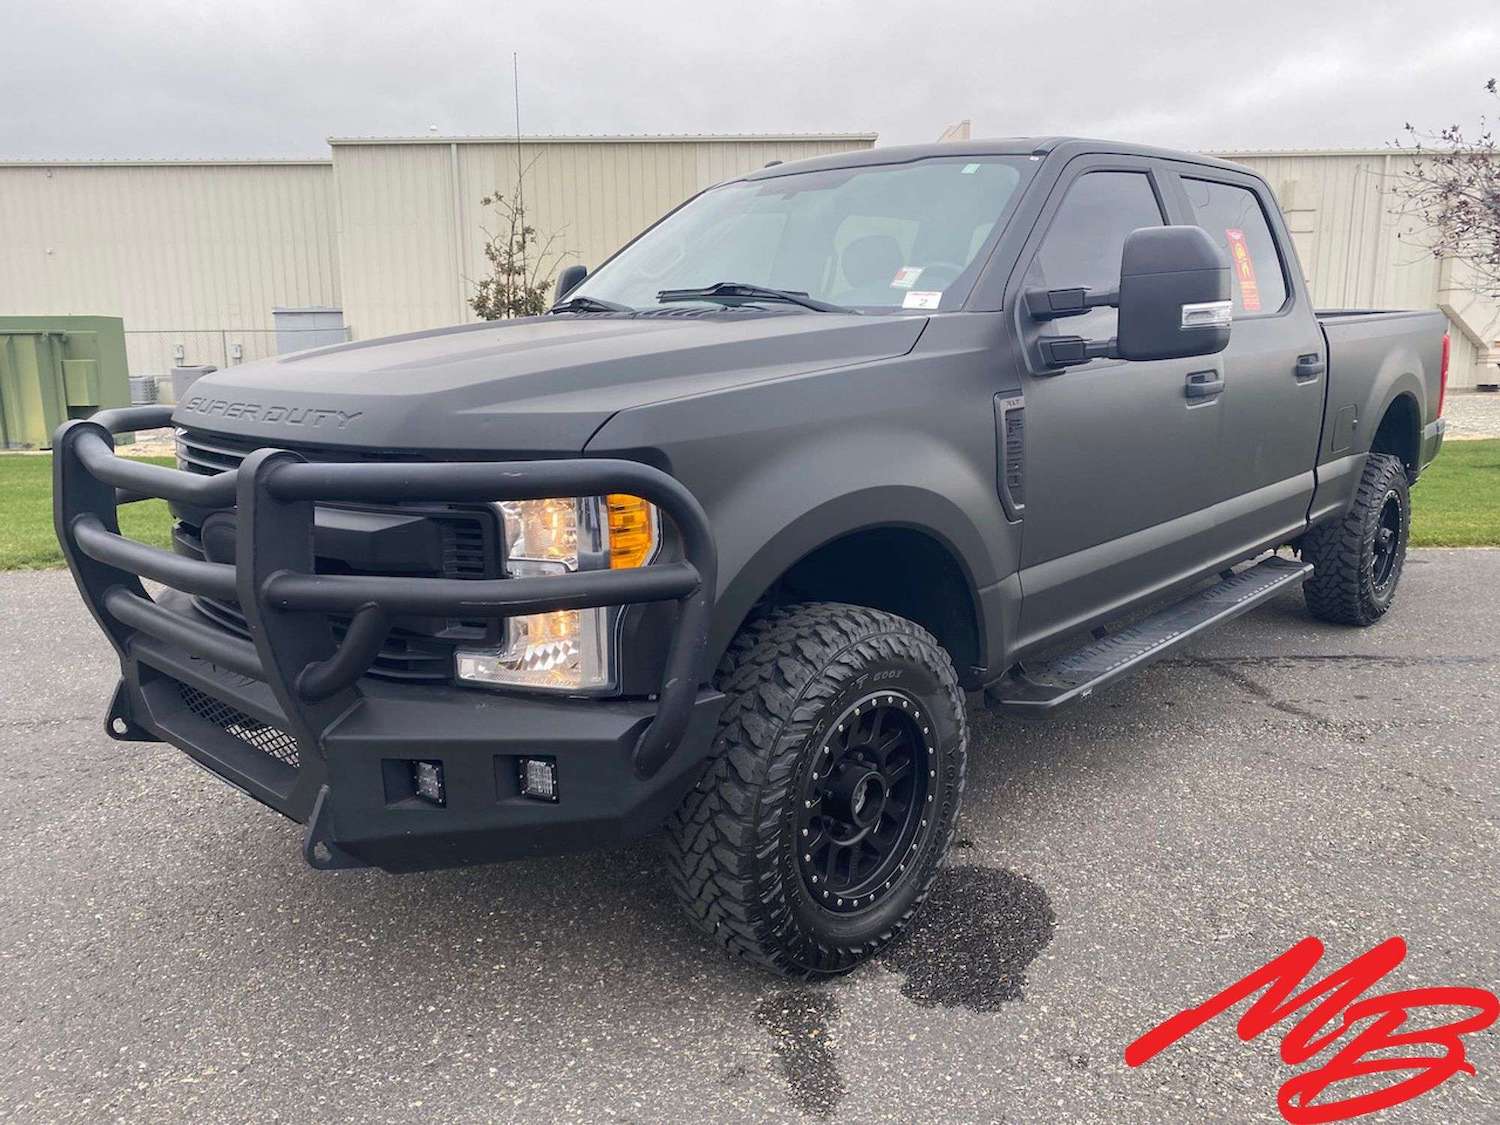 Kanye West's 2017 Ford F-250 SRW 4x4 XLT from Cody, Wyoming now up for auction from Musser Bros.